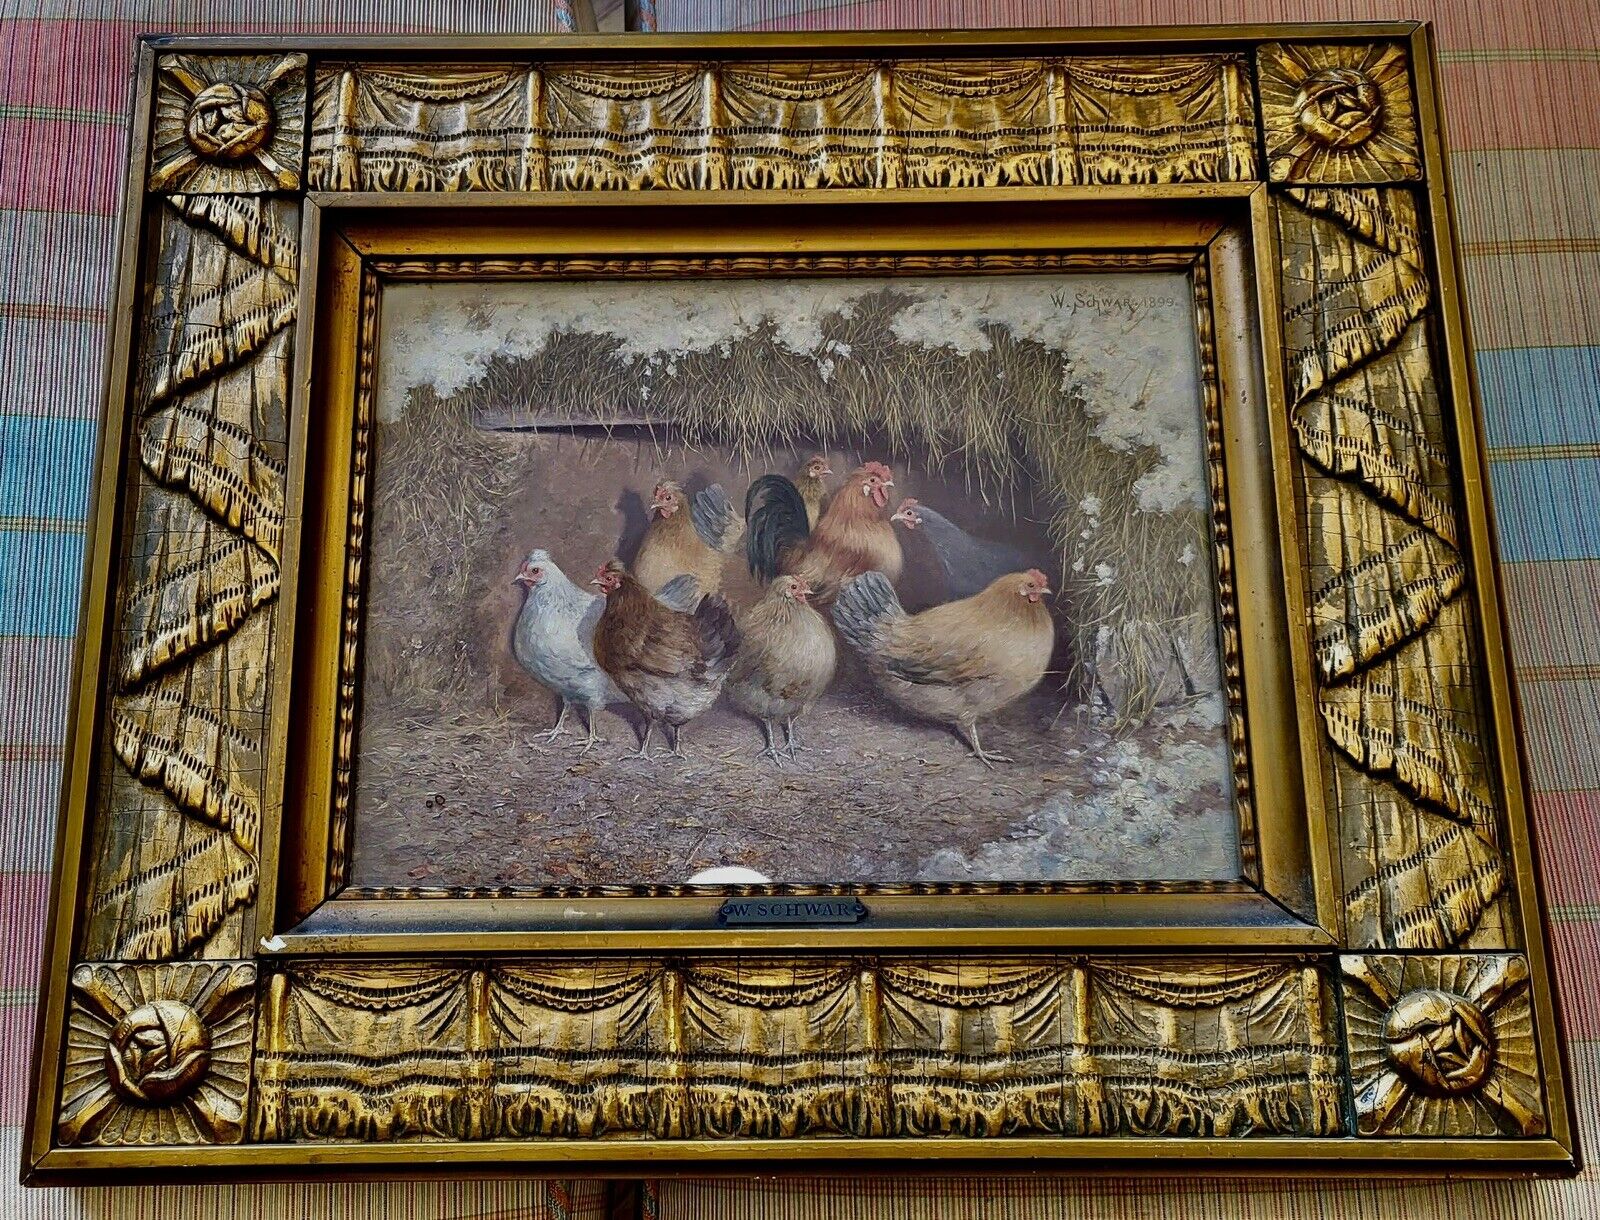 19th Century Oil Painting Chickens in Coupe signed W. Schwar Great Gilt Framed